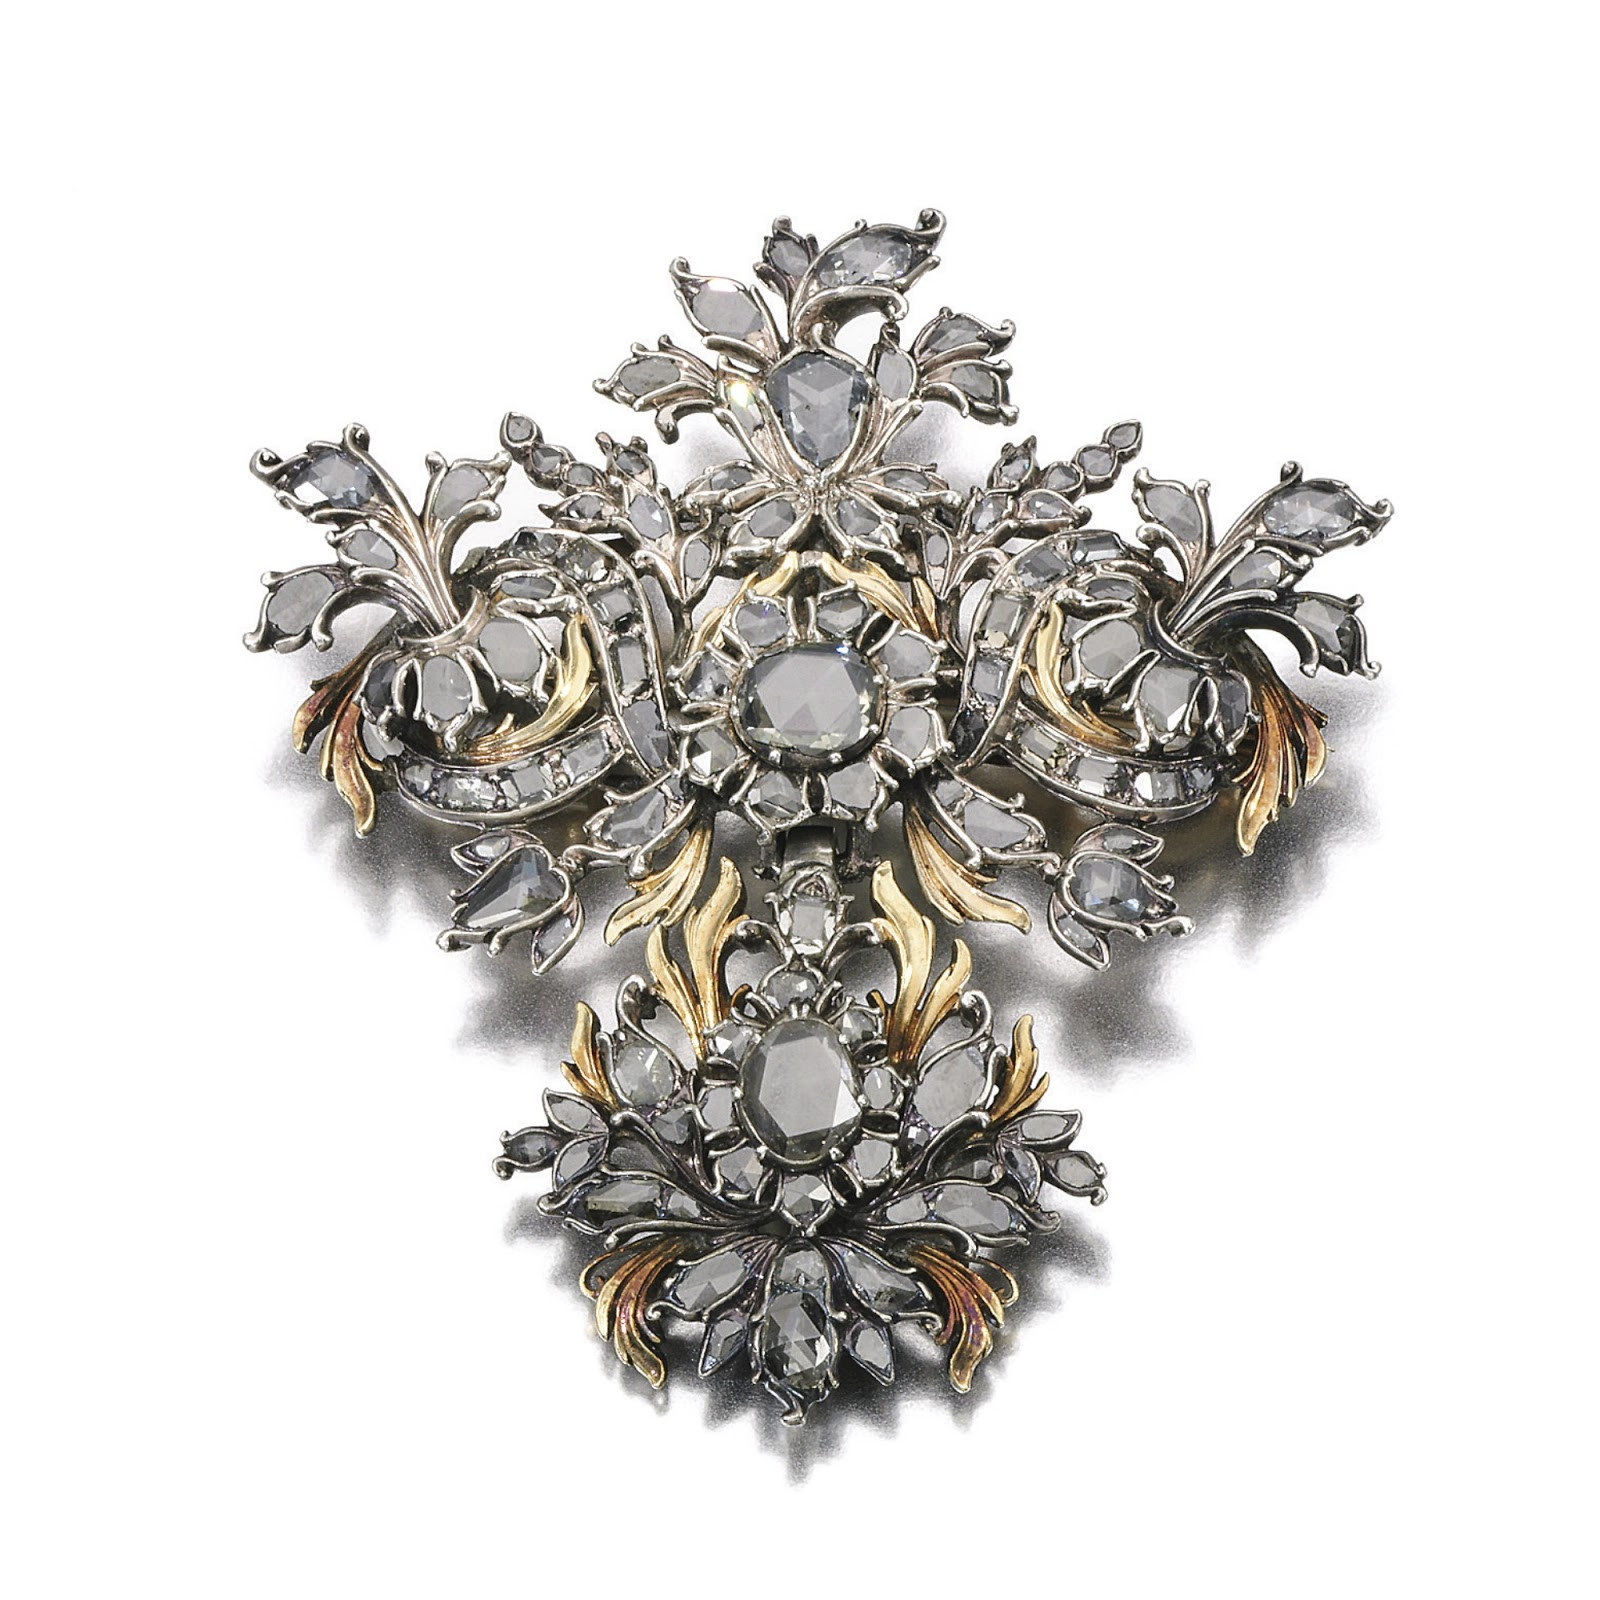 Diamond Brooches
 Marie Poutine s Jewels & Royals Always a floral brooch